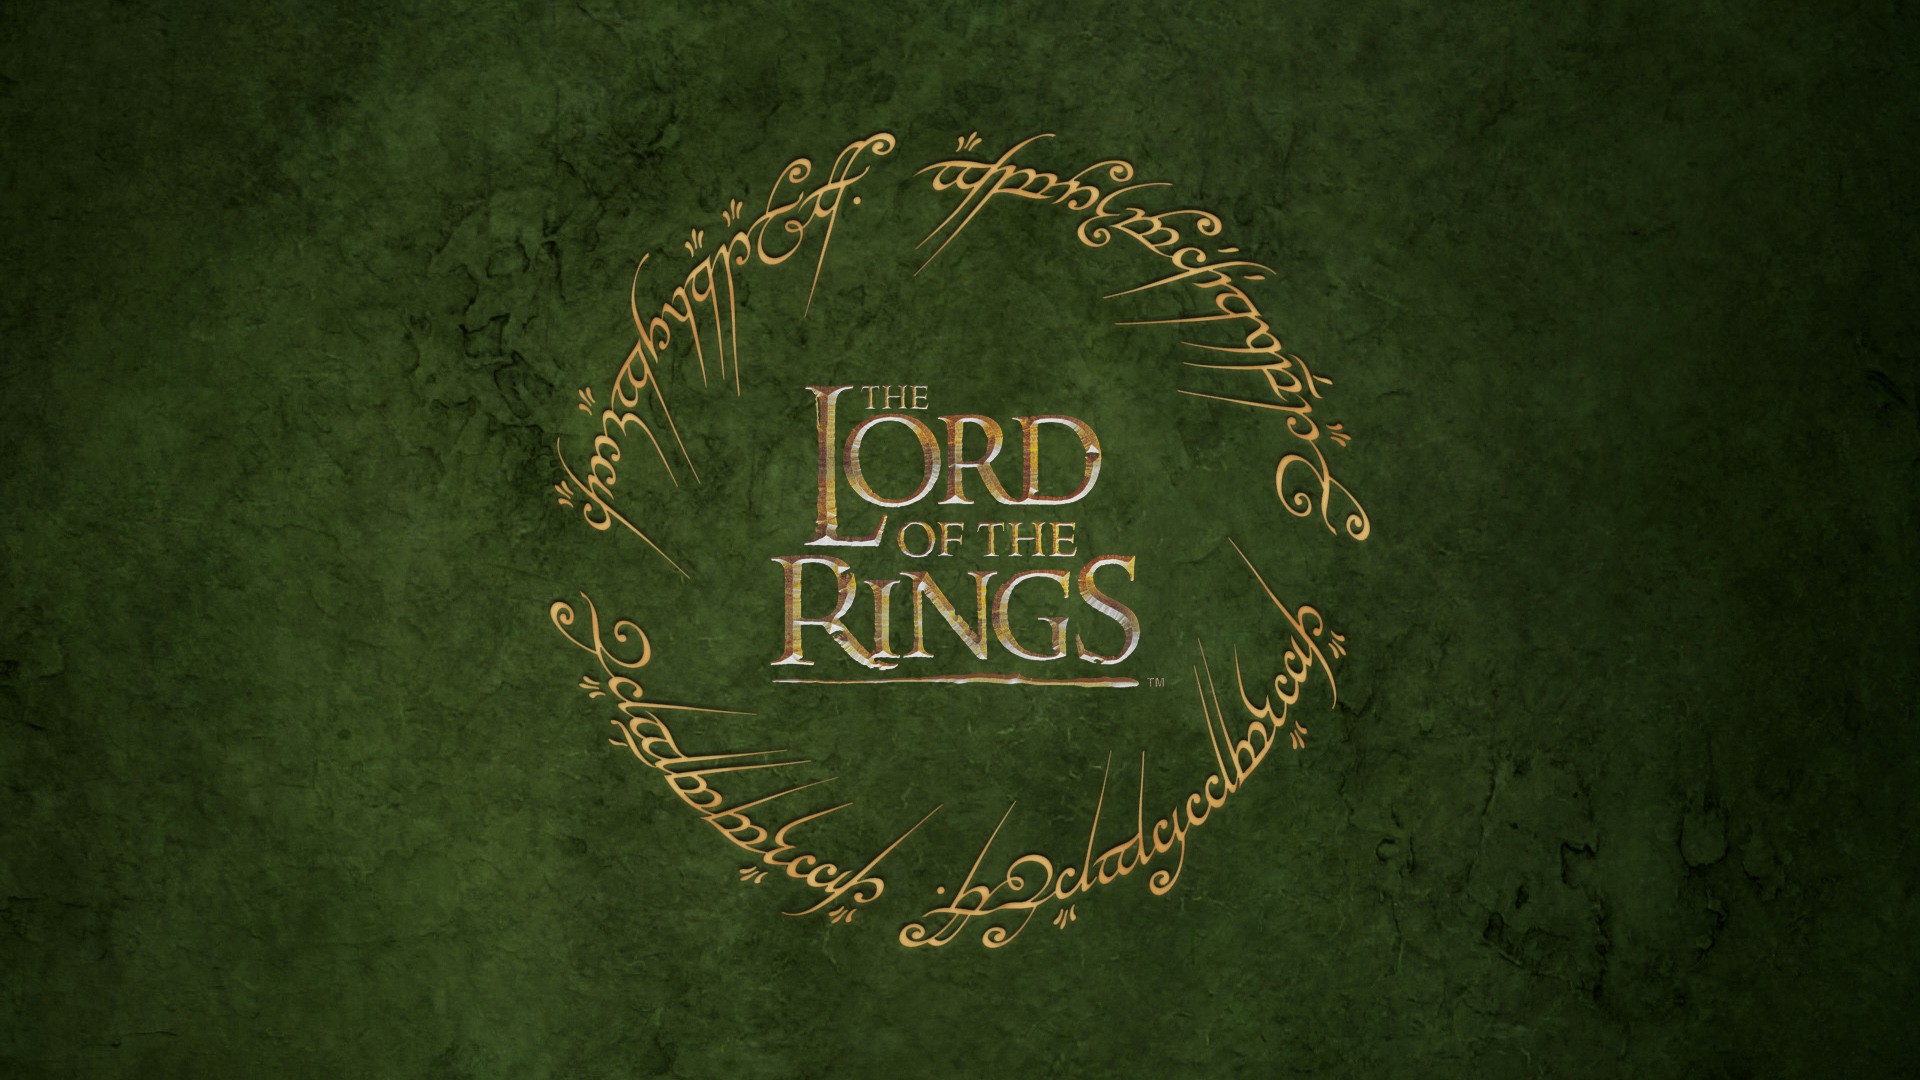 General 1920x1080 The Lord of the Rings movies 2001 (year) J. R. R. Tolkien